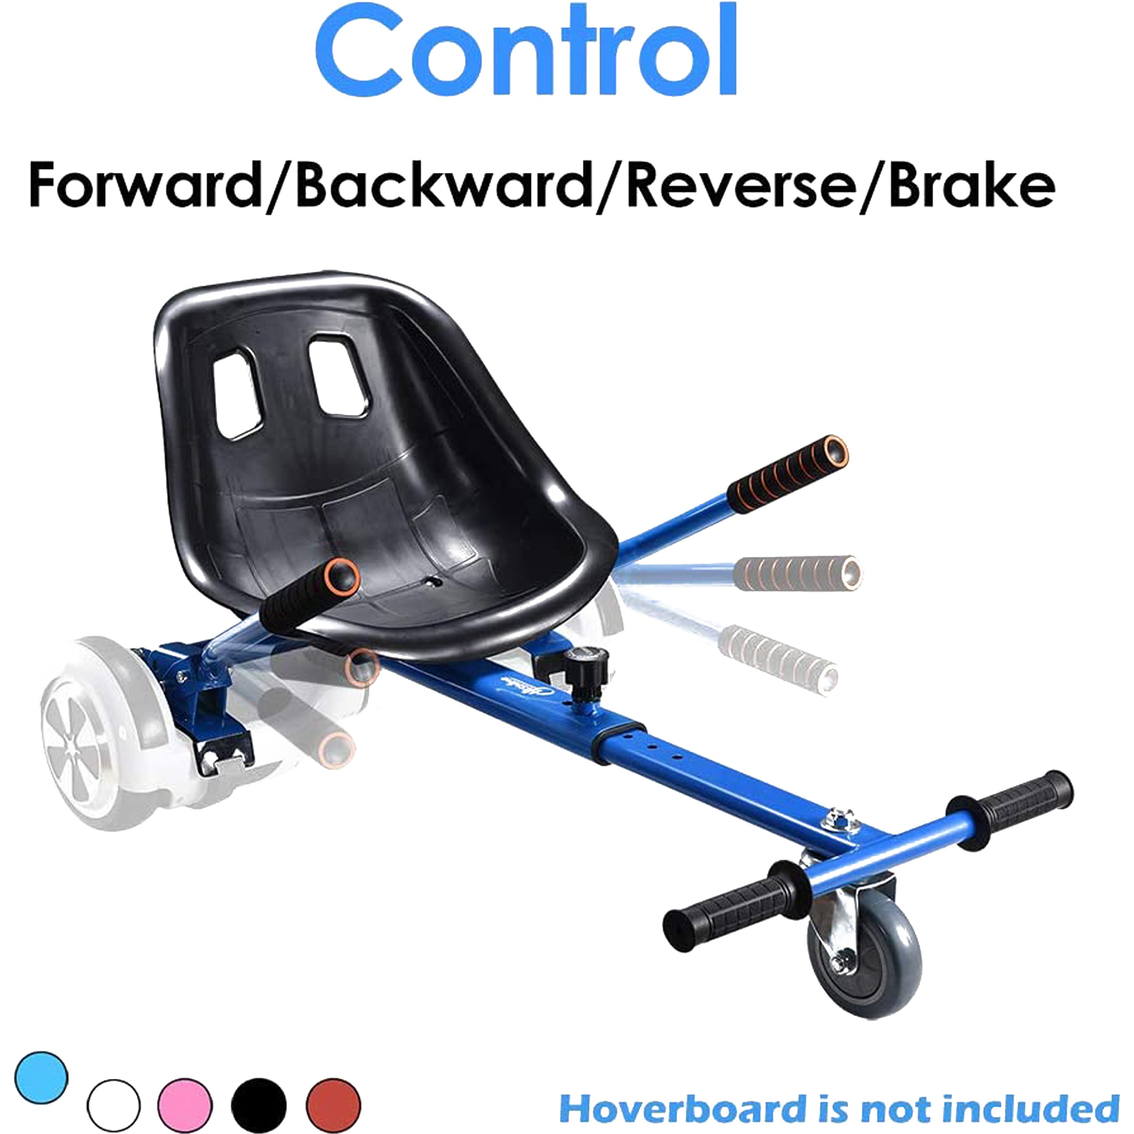 GlareWheel Buggy Attachment for Transforming Hoverboard Scooter into Go Kart - Image 5 of 6